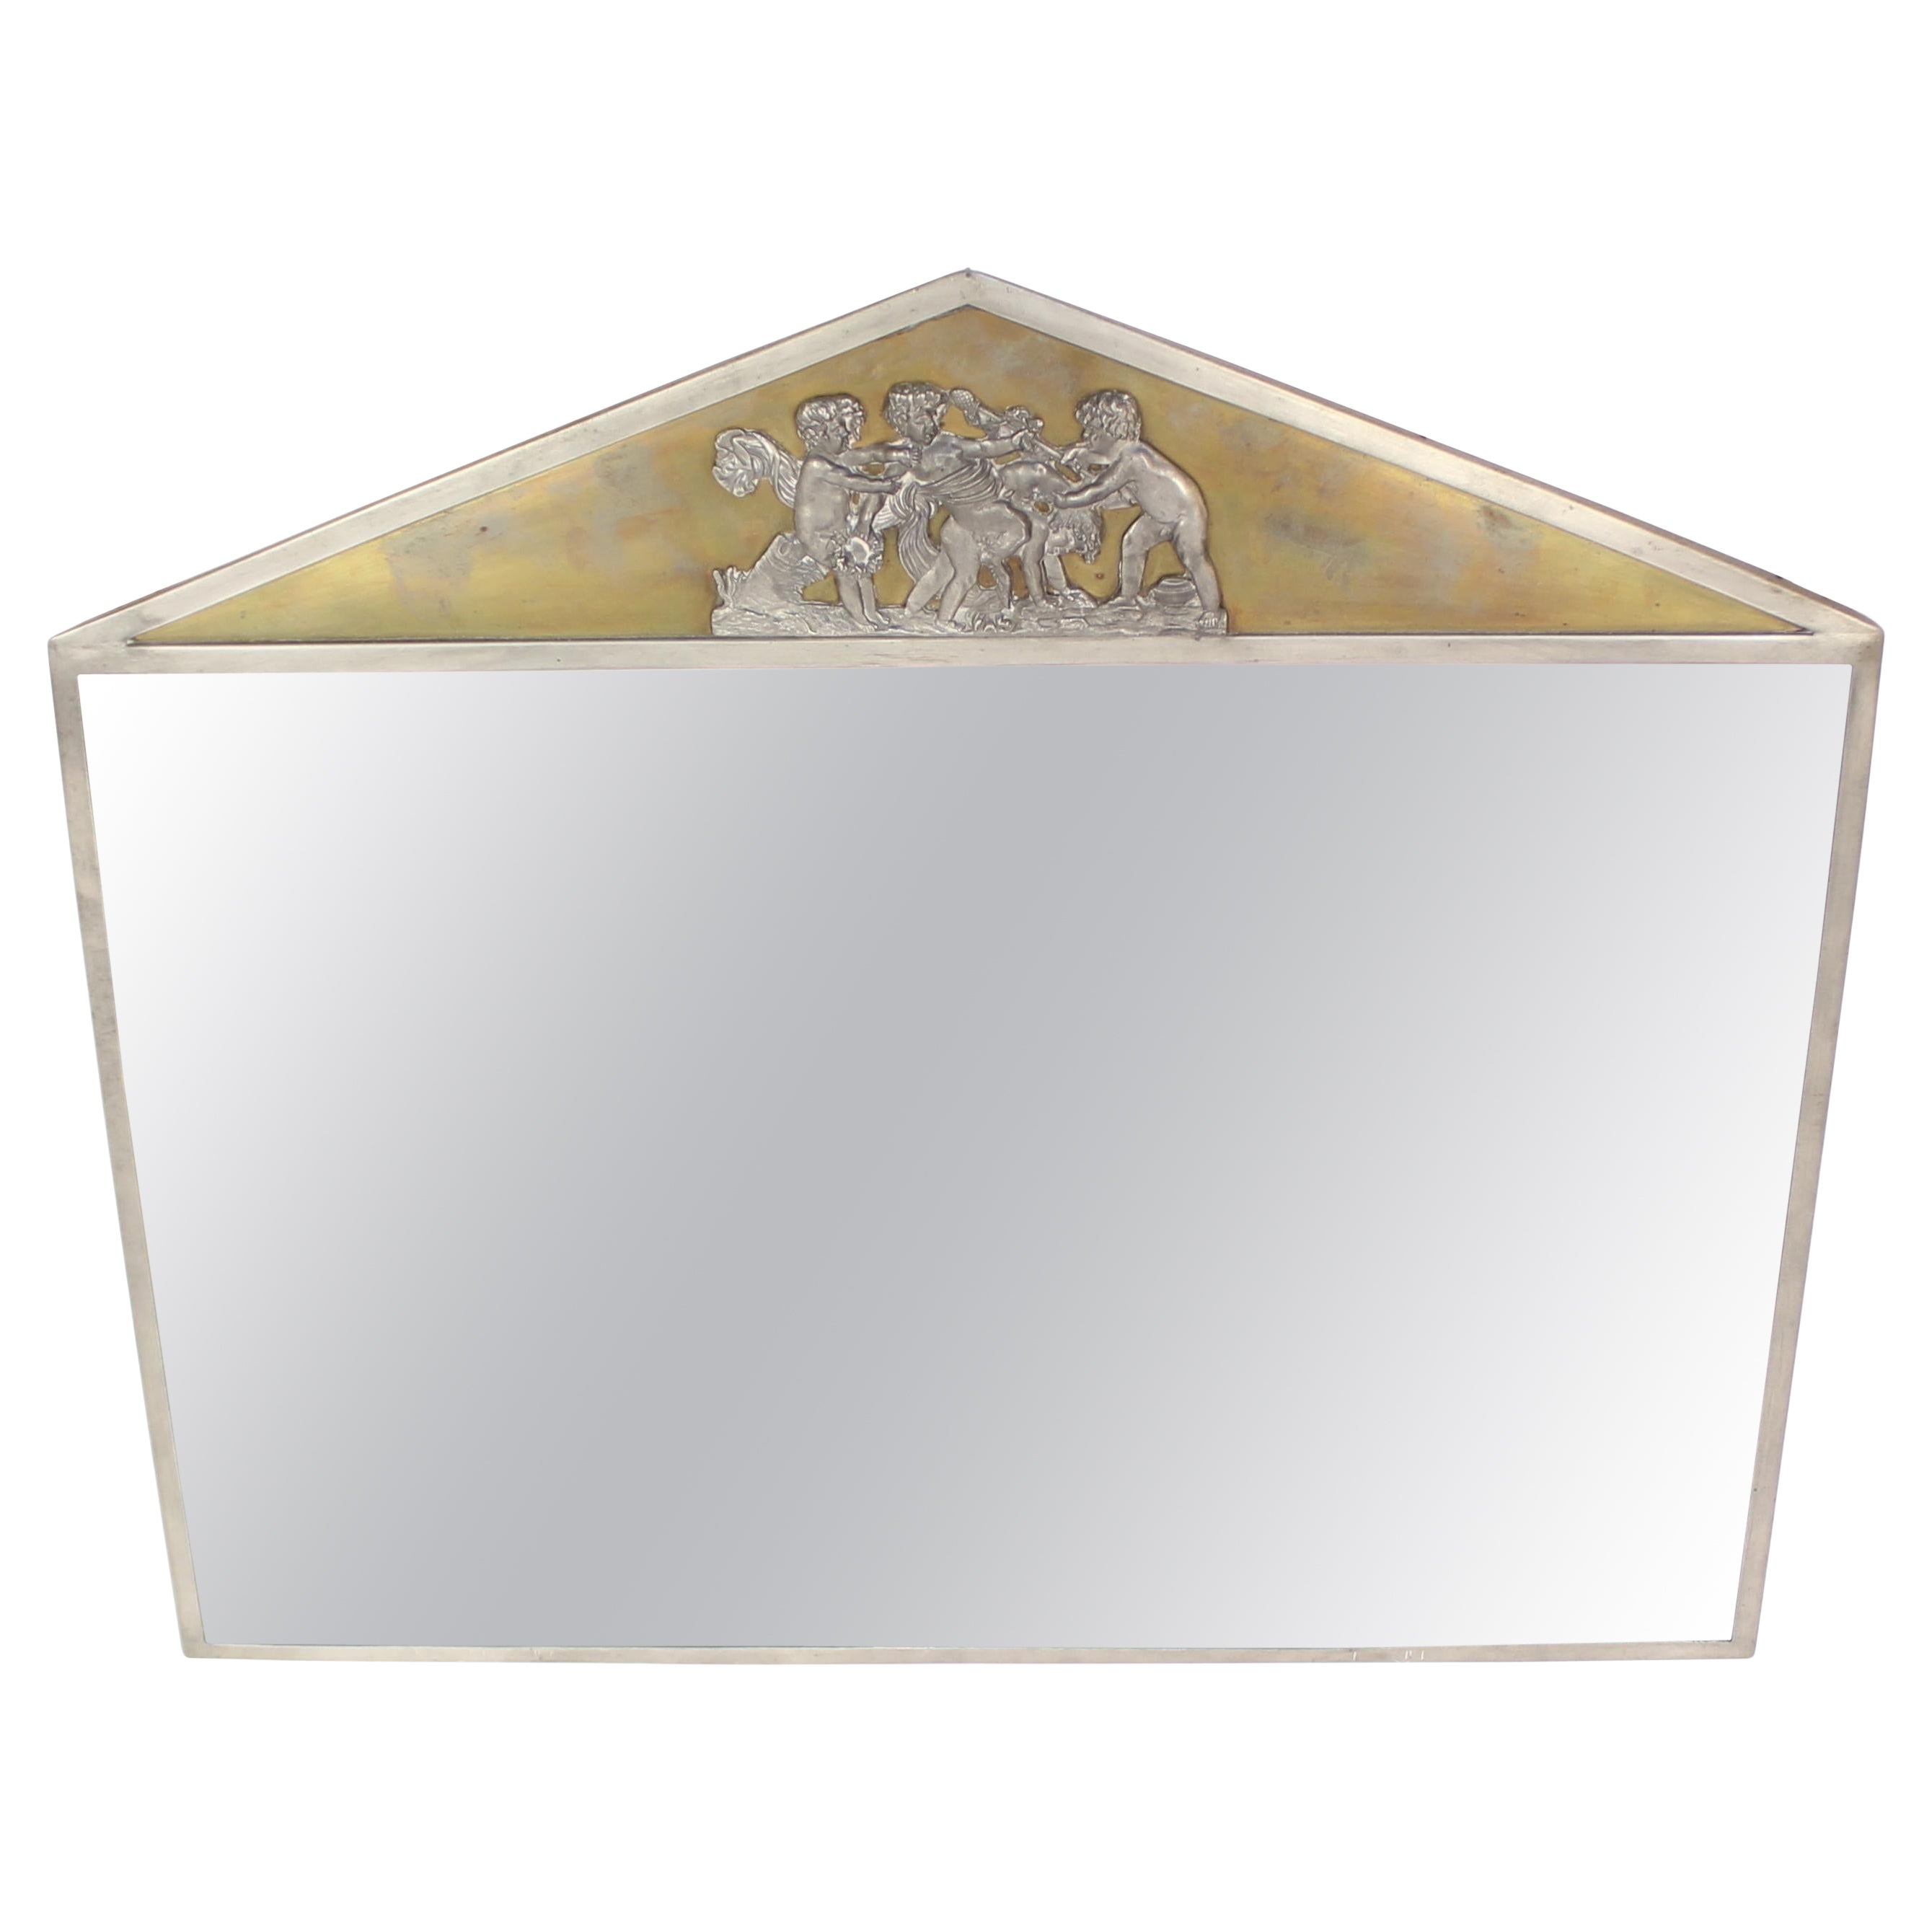 Unique Swedish Grace Pewter and Brass Mirror by C.G. Råström, 1928